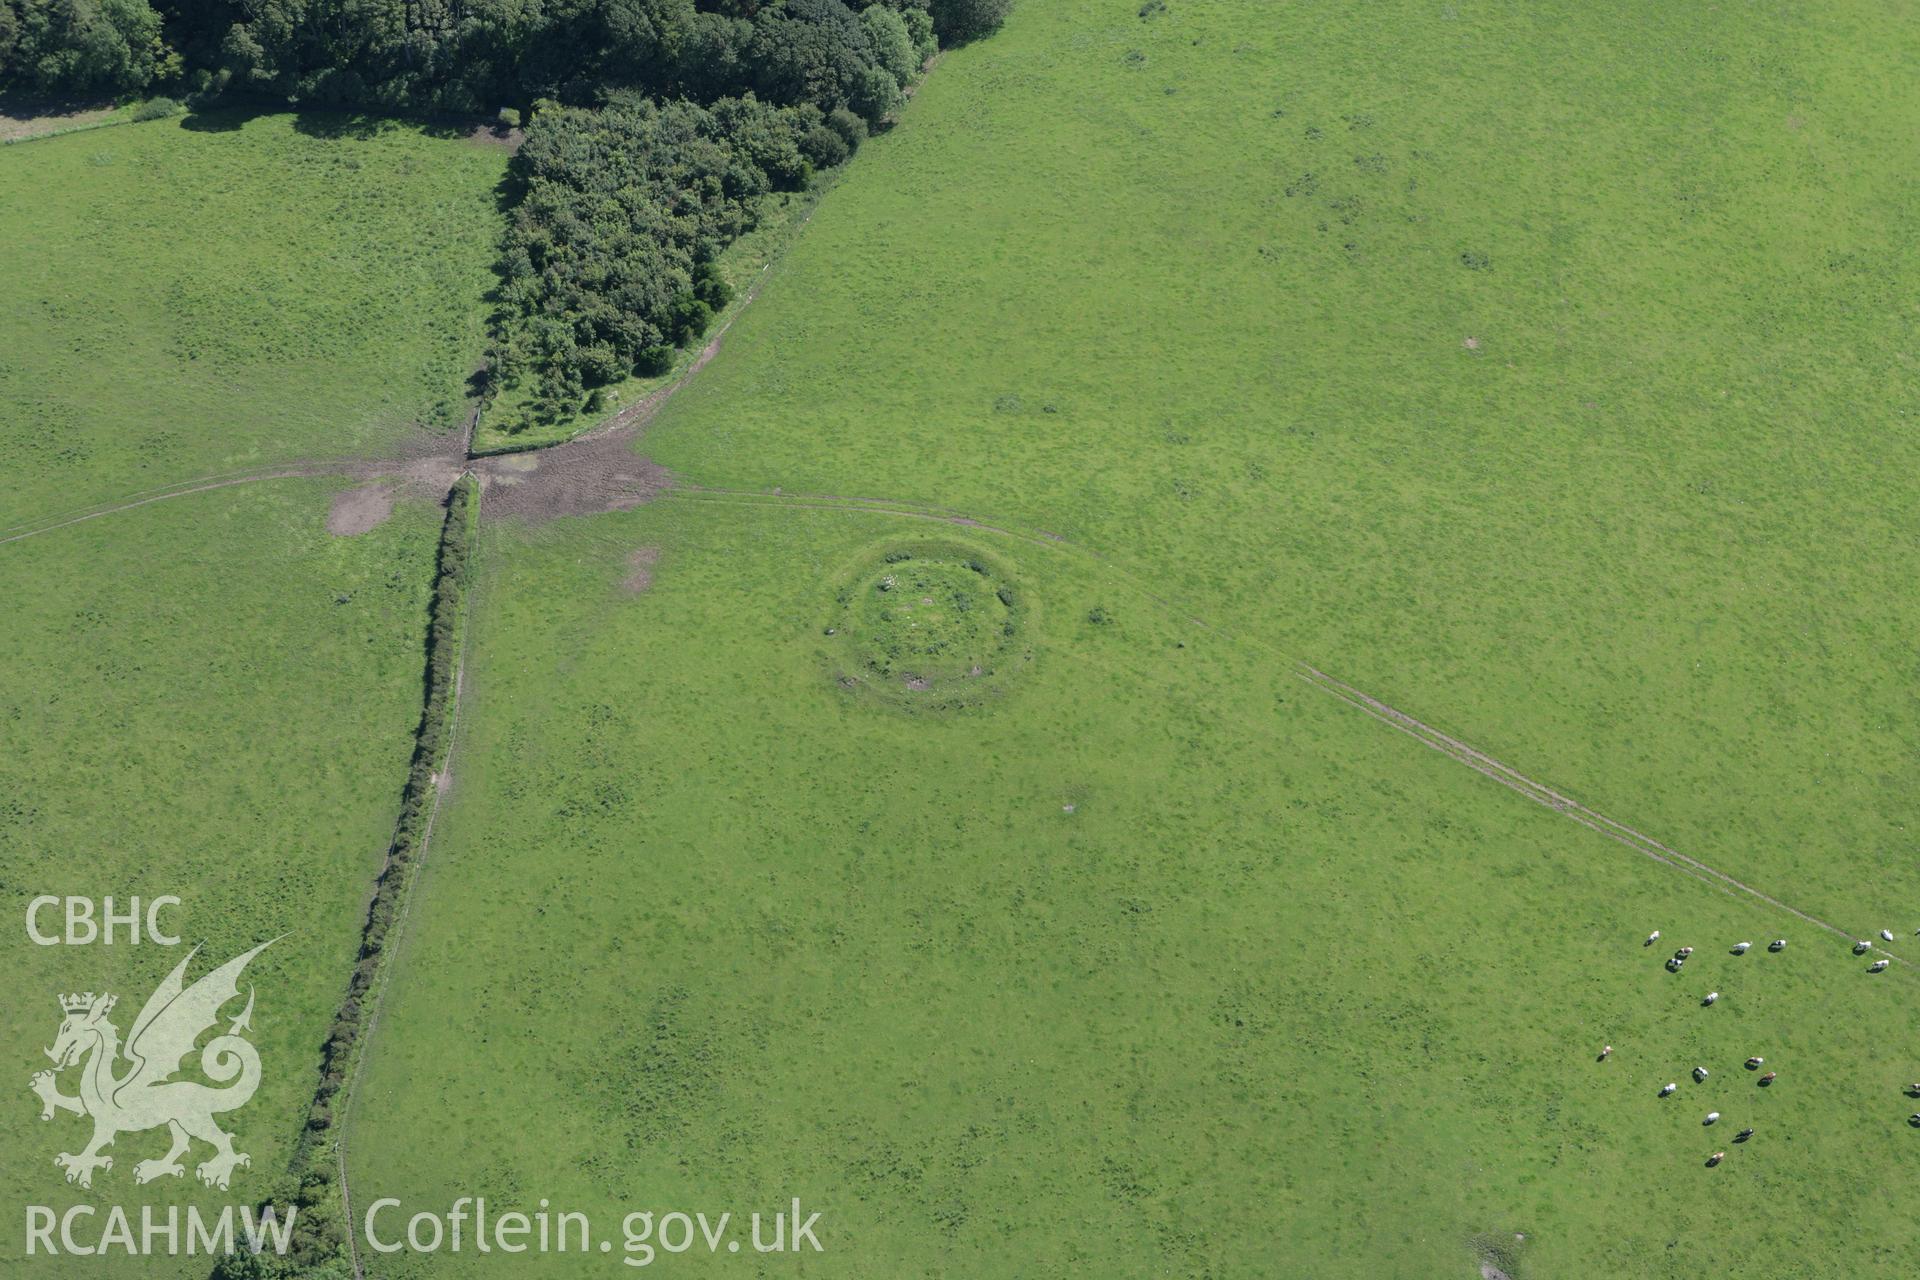 RCAHMW colour oblique aerial photograph of St Elmo's Summer House Barrow I. Taken on 31 July 2007 by Toby Driver